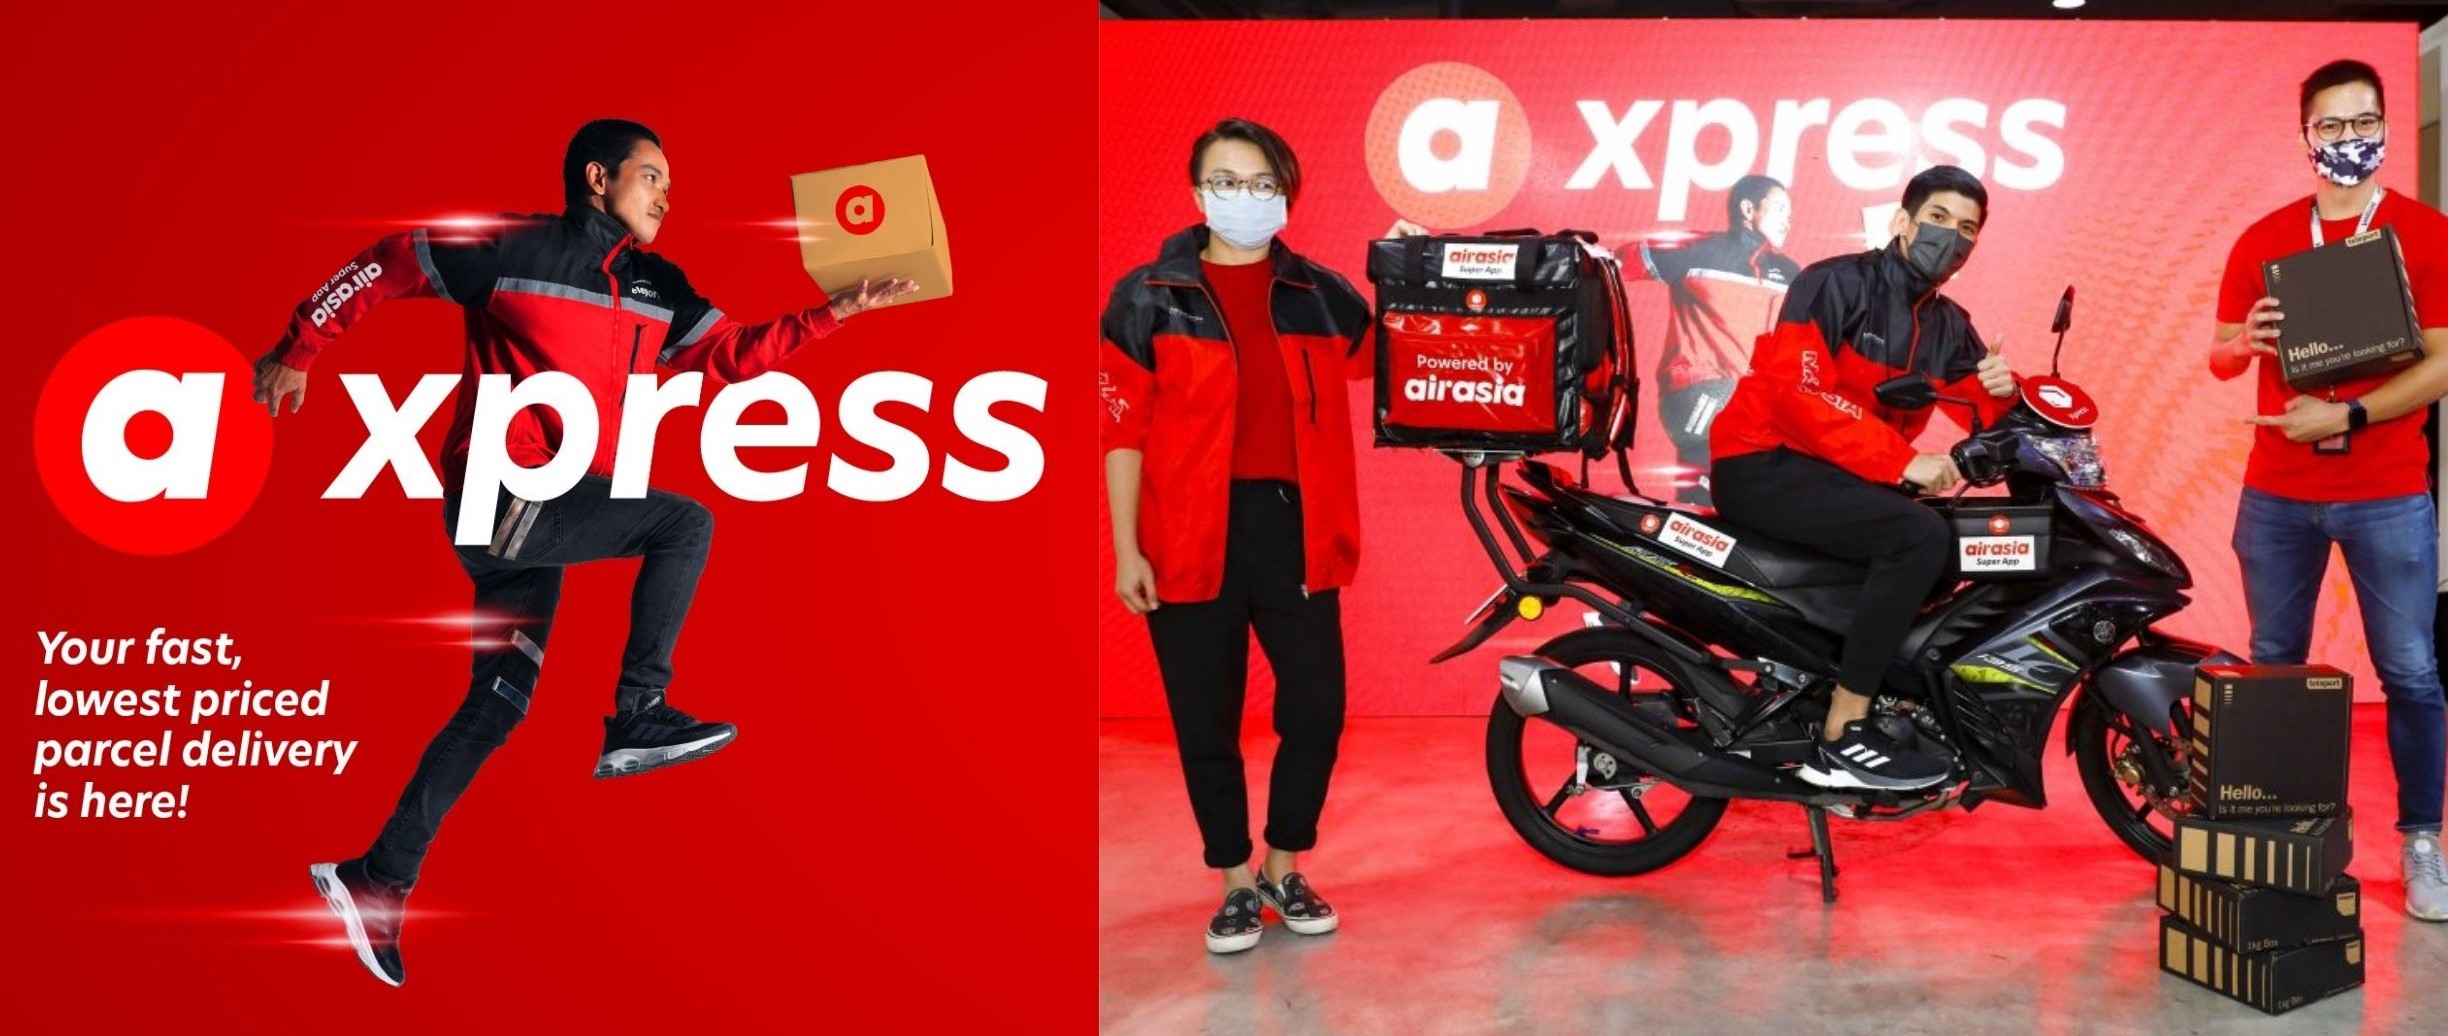 AirAsia aims to provide the “lowest parcel delivery fares” for all. 